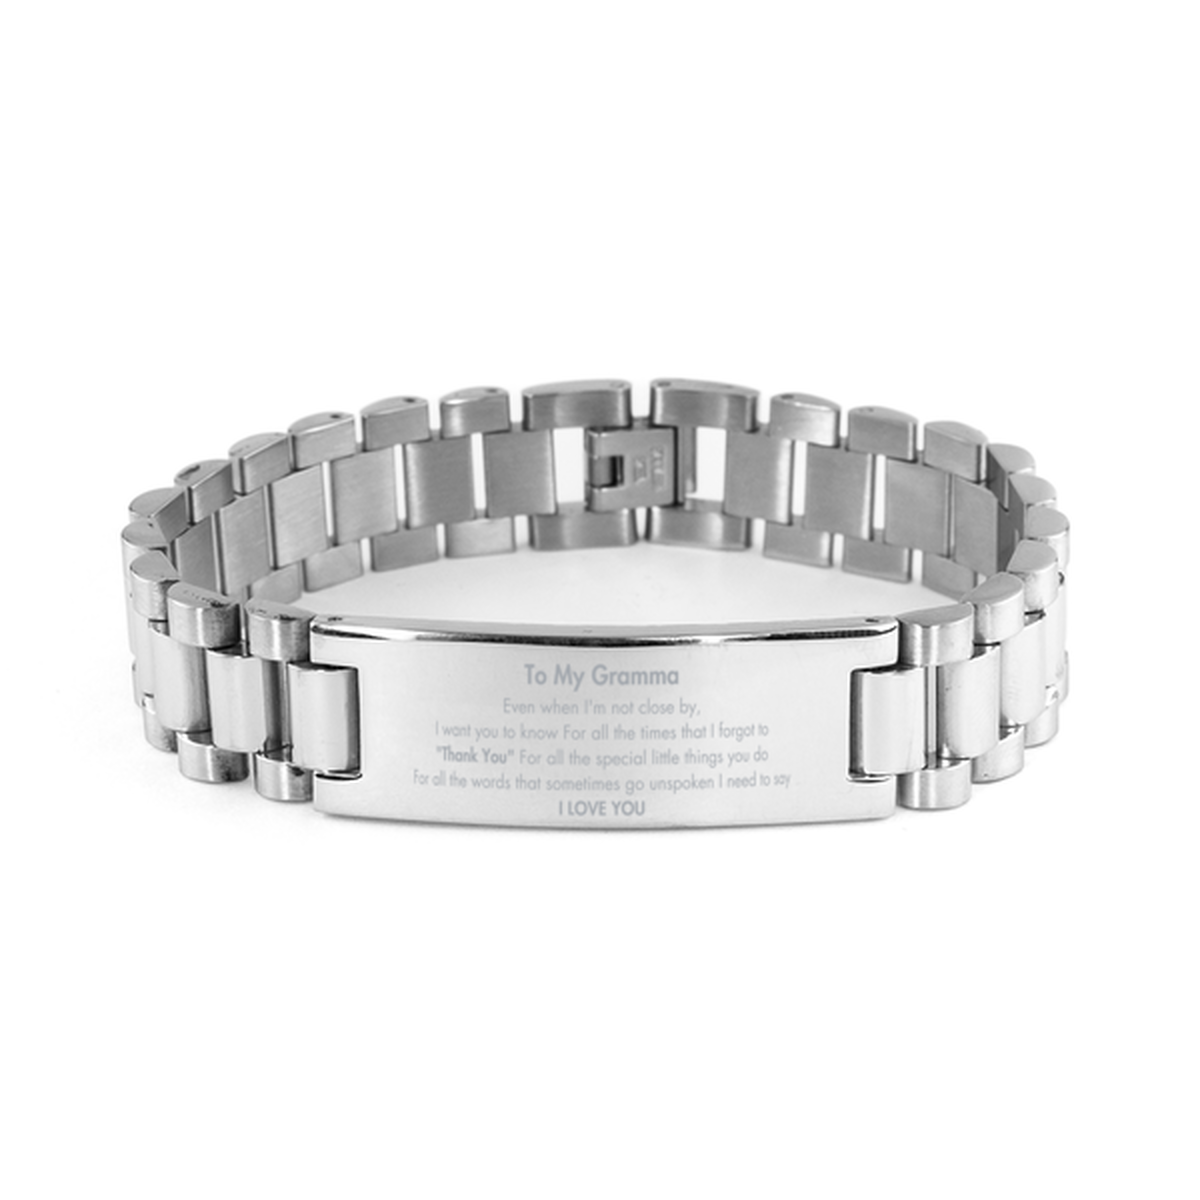 Thank You Gifts for Gramma, Keepsake Ladder Stainless Steel Bracelet Gifts for Gramma Birthday Mother's day Father's Day Gramma For all the words That sometimes go unspoken I need to say I LOVE YOU